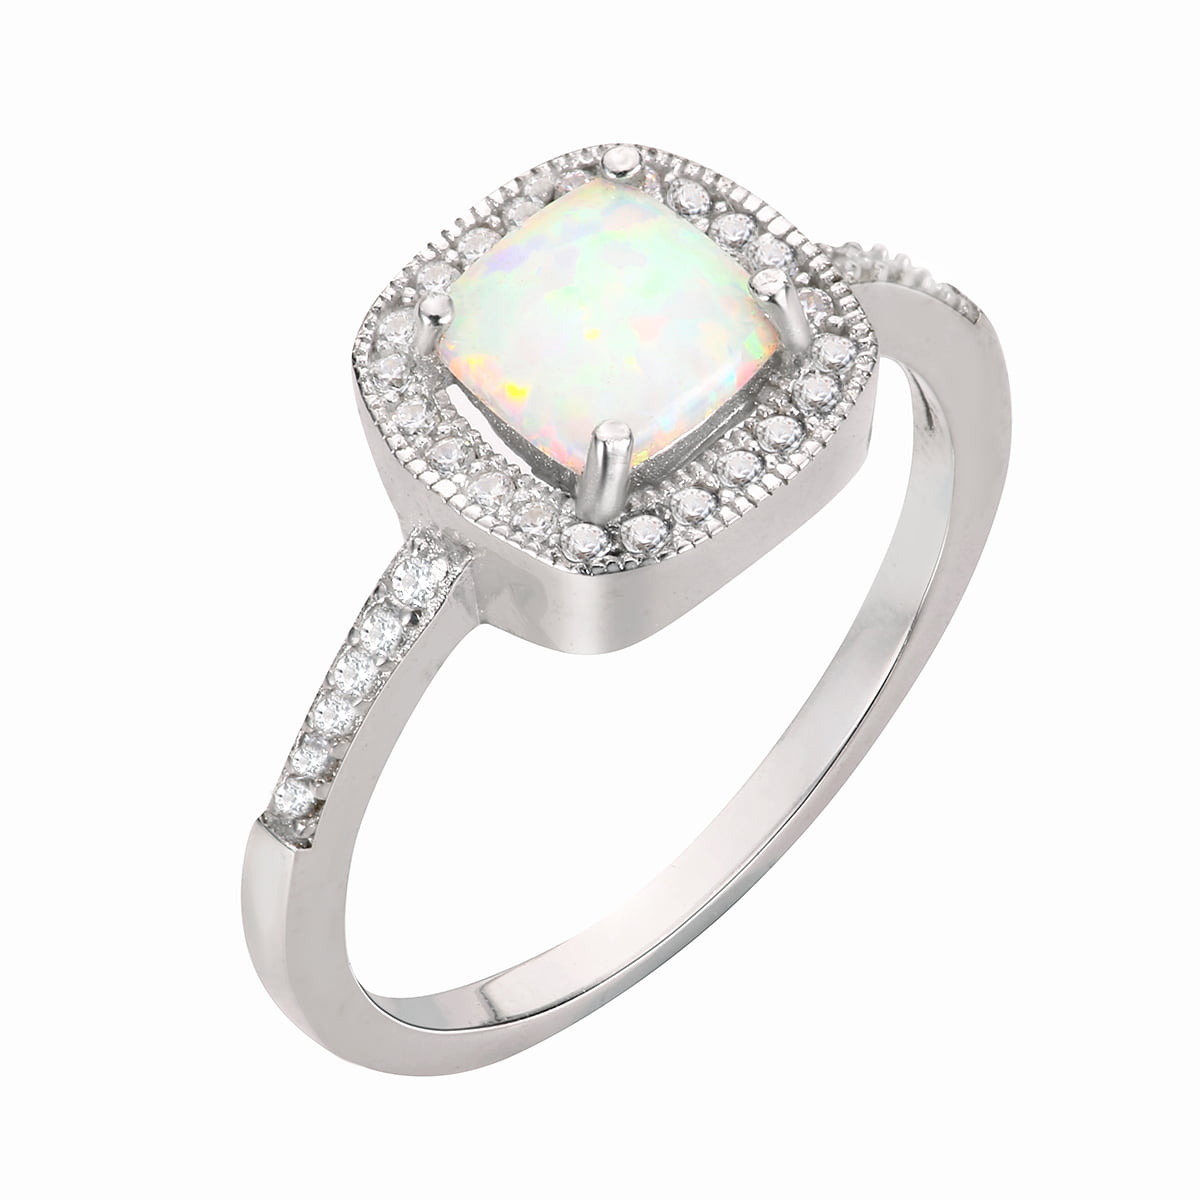 CloseoutWarehouse Princess Center Cubic Zirconia Simulated Opal Ring 925 Sterling Silver 